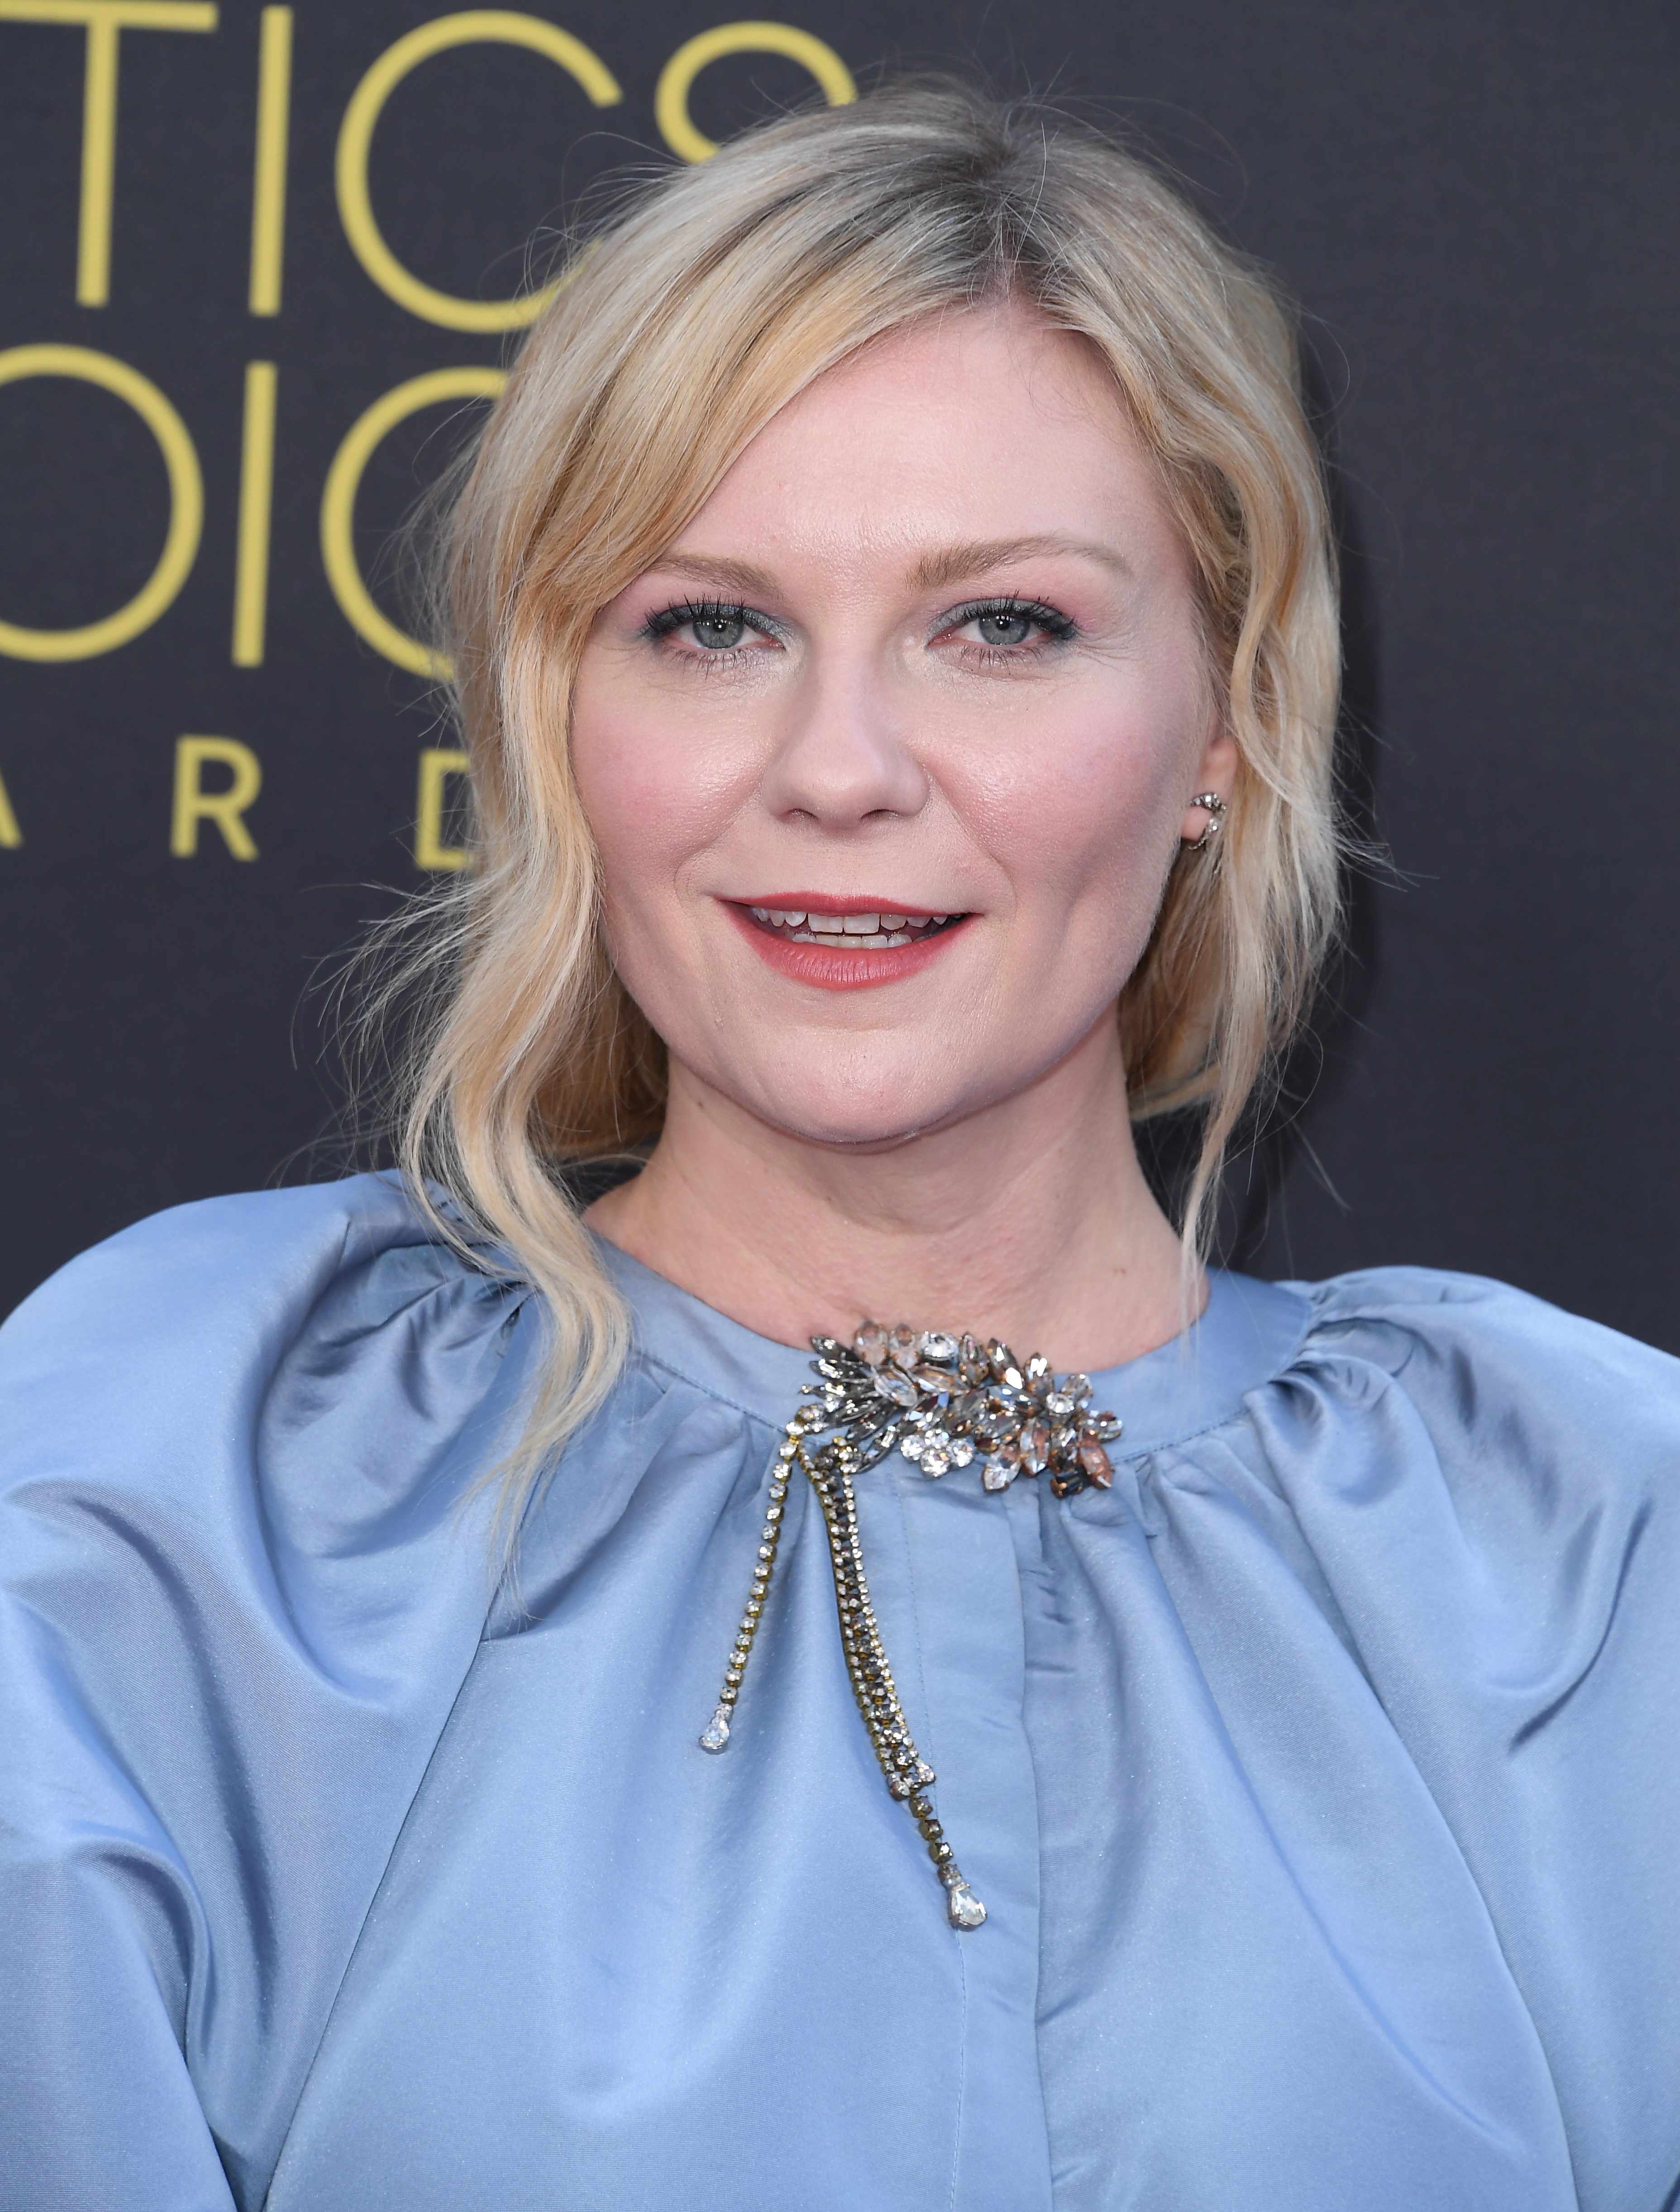 Kirsten Dunst at an event wearing a satin gown with an ornate jeweled neckline